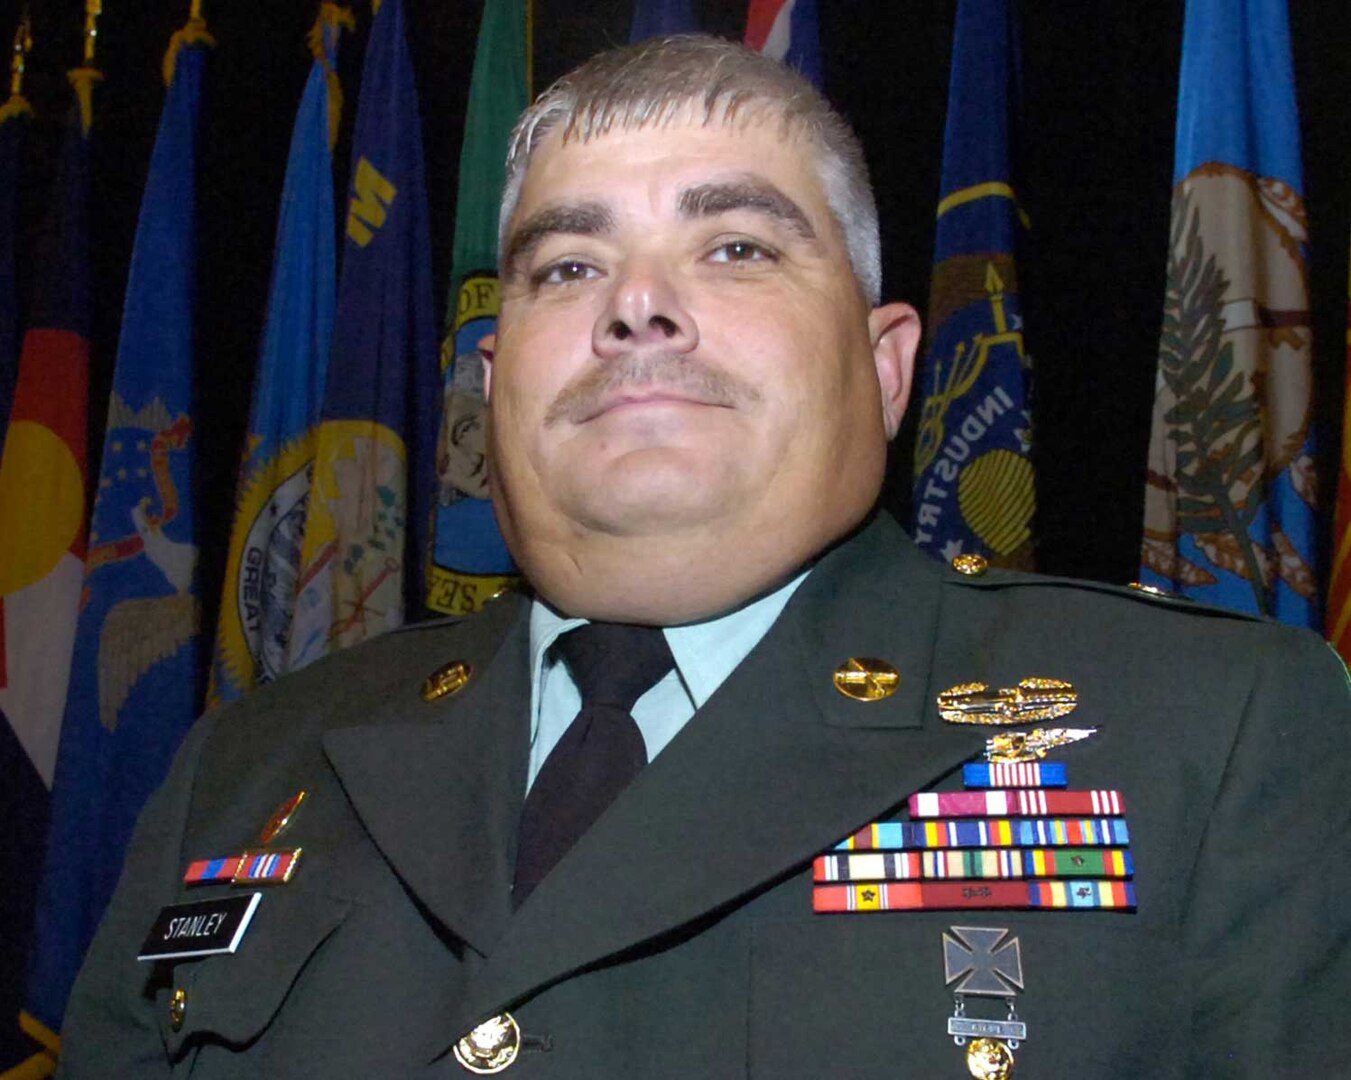 Staff Sgt. Danny Stanley at the 129th National Guard Association of the United States General Conference in San Juan, Puerto Rico, on Aug. 25, 2007.